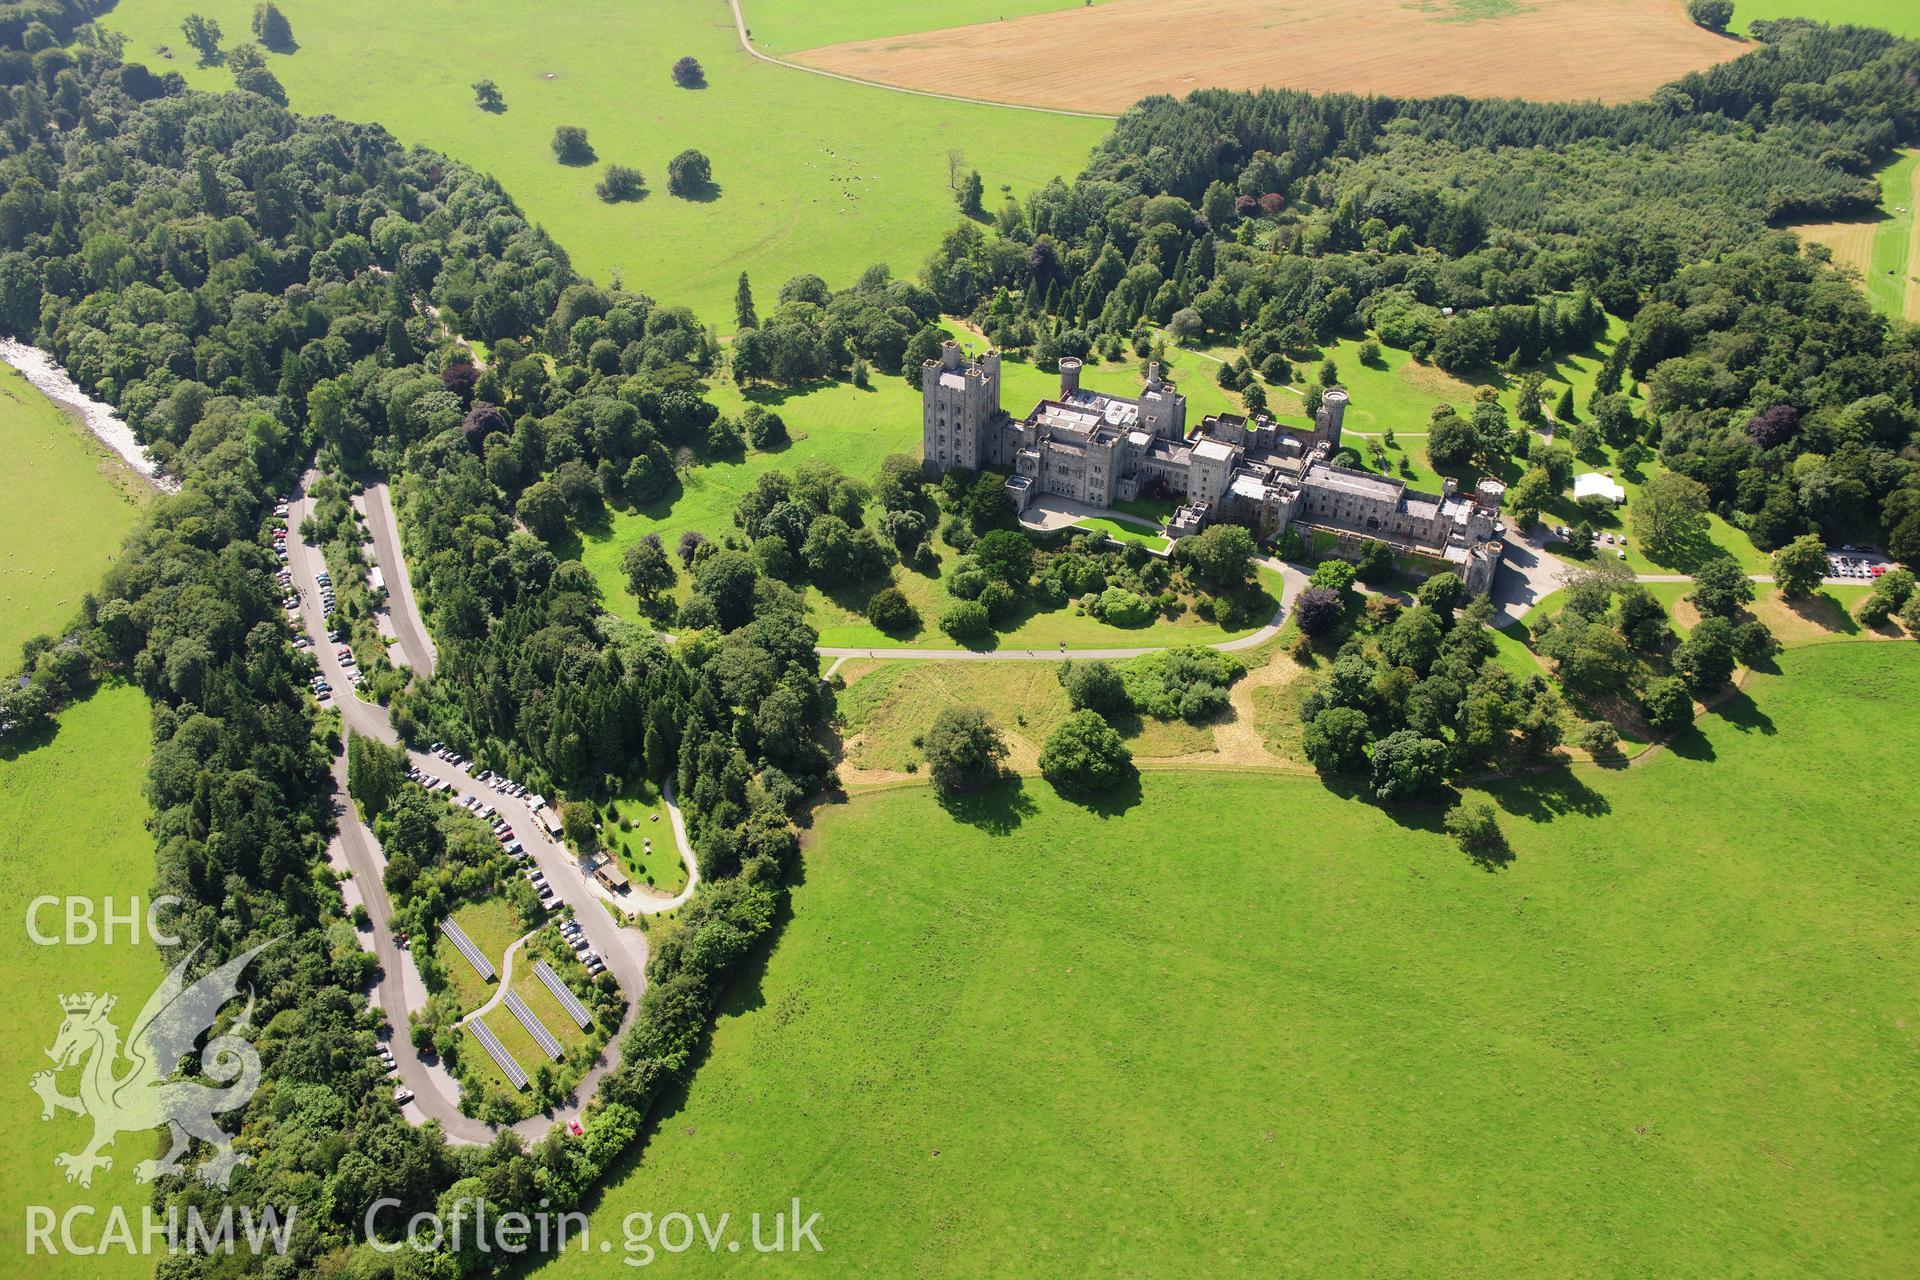 RCAHMW colour oblique photograph of Penrhyn Castle, viewed from the north-east. Taken by Toby Driver on 10/08/2012.